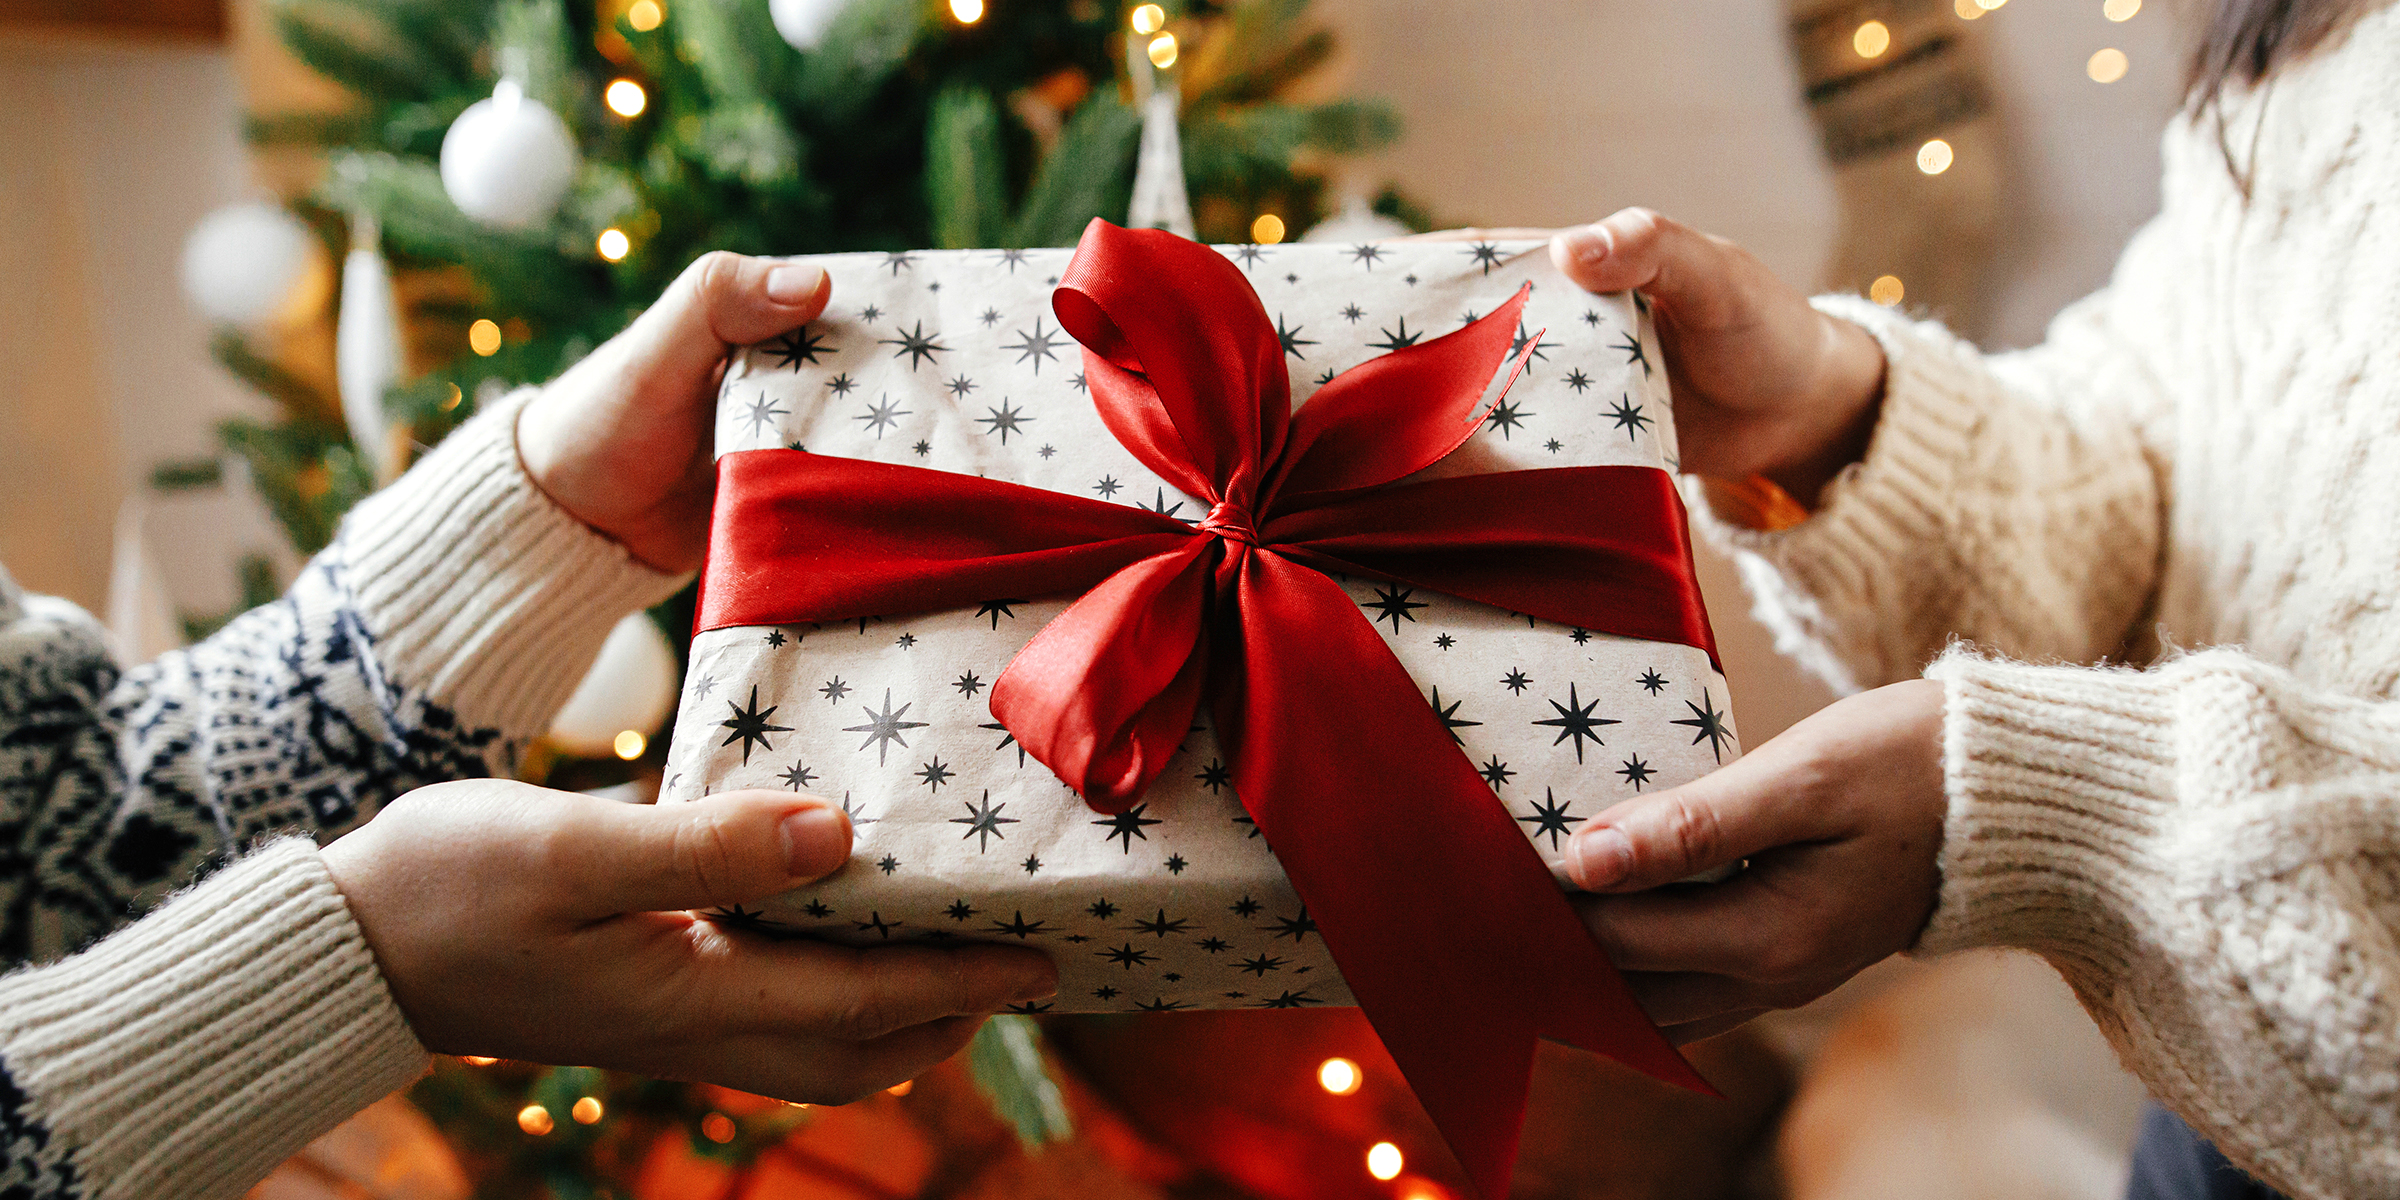 A present | Source: Getty Images